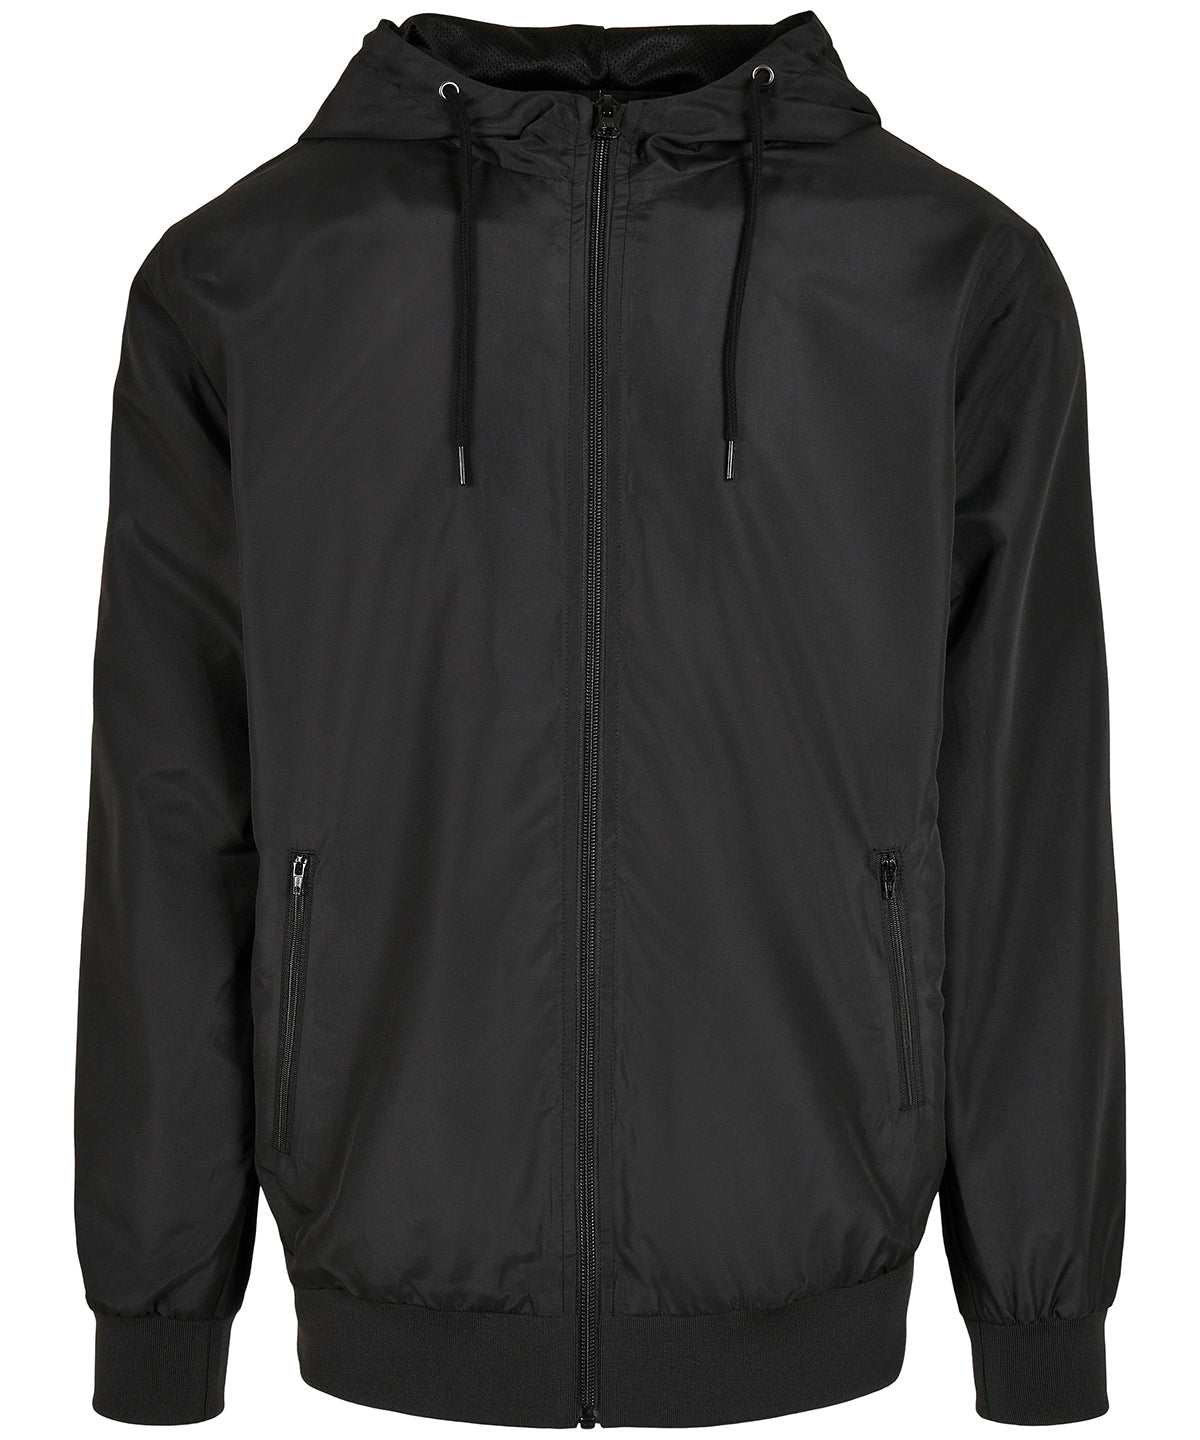 Personalised Jackets - Black Build Your Brand Recycled windrunner